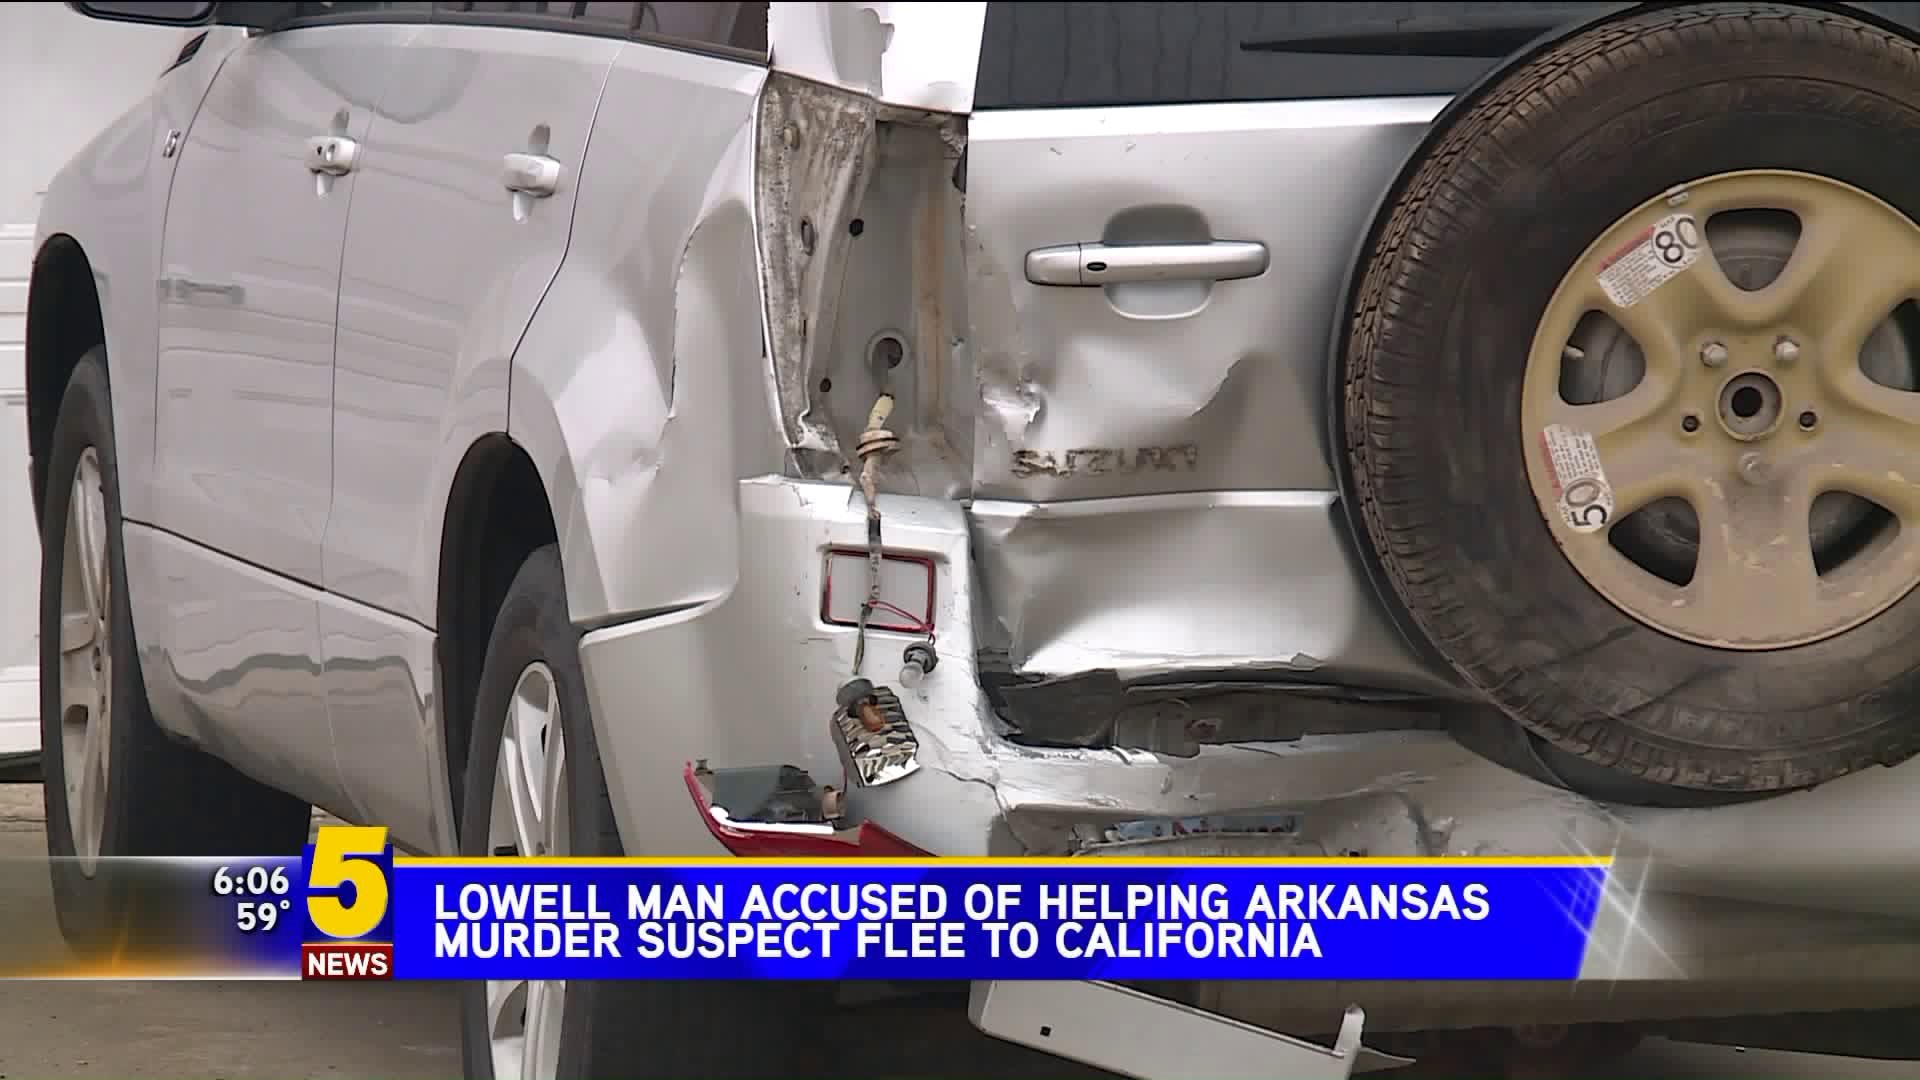 Lowell Man Accused Of Helping Arkansas Murder Suspect Flee To California